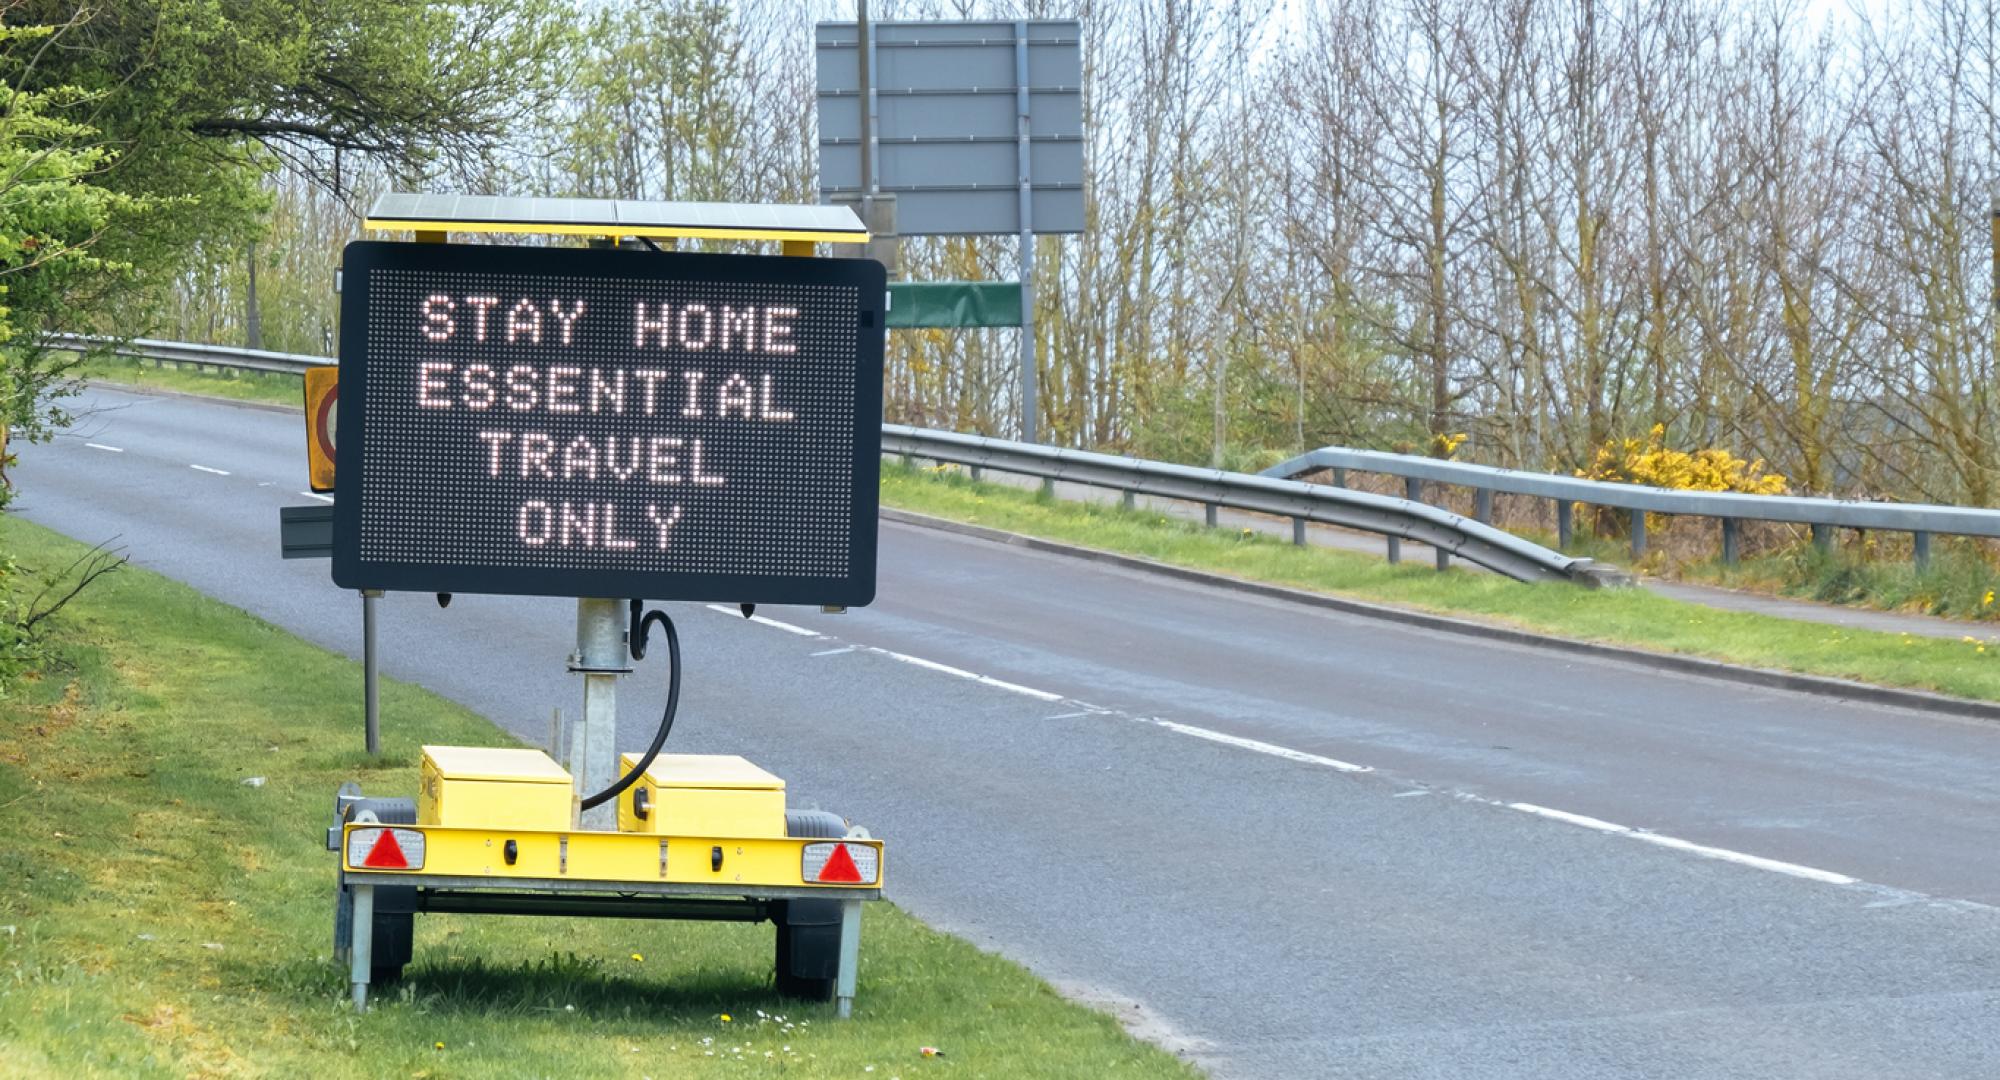 Road sign indicating essential travel only due to the Covid-19 lockdown